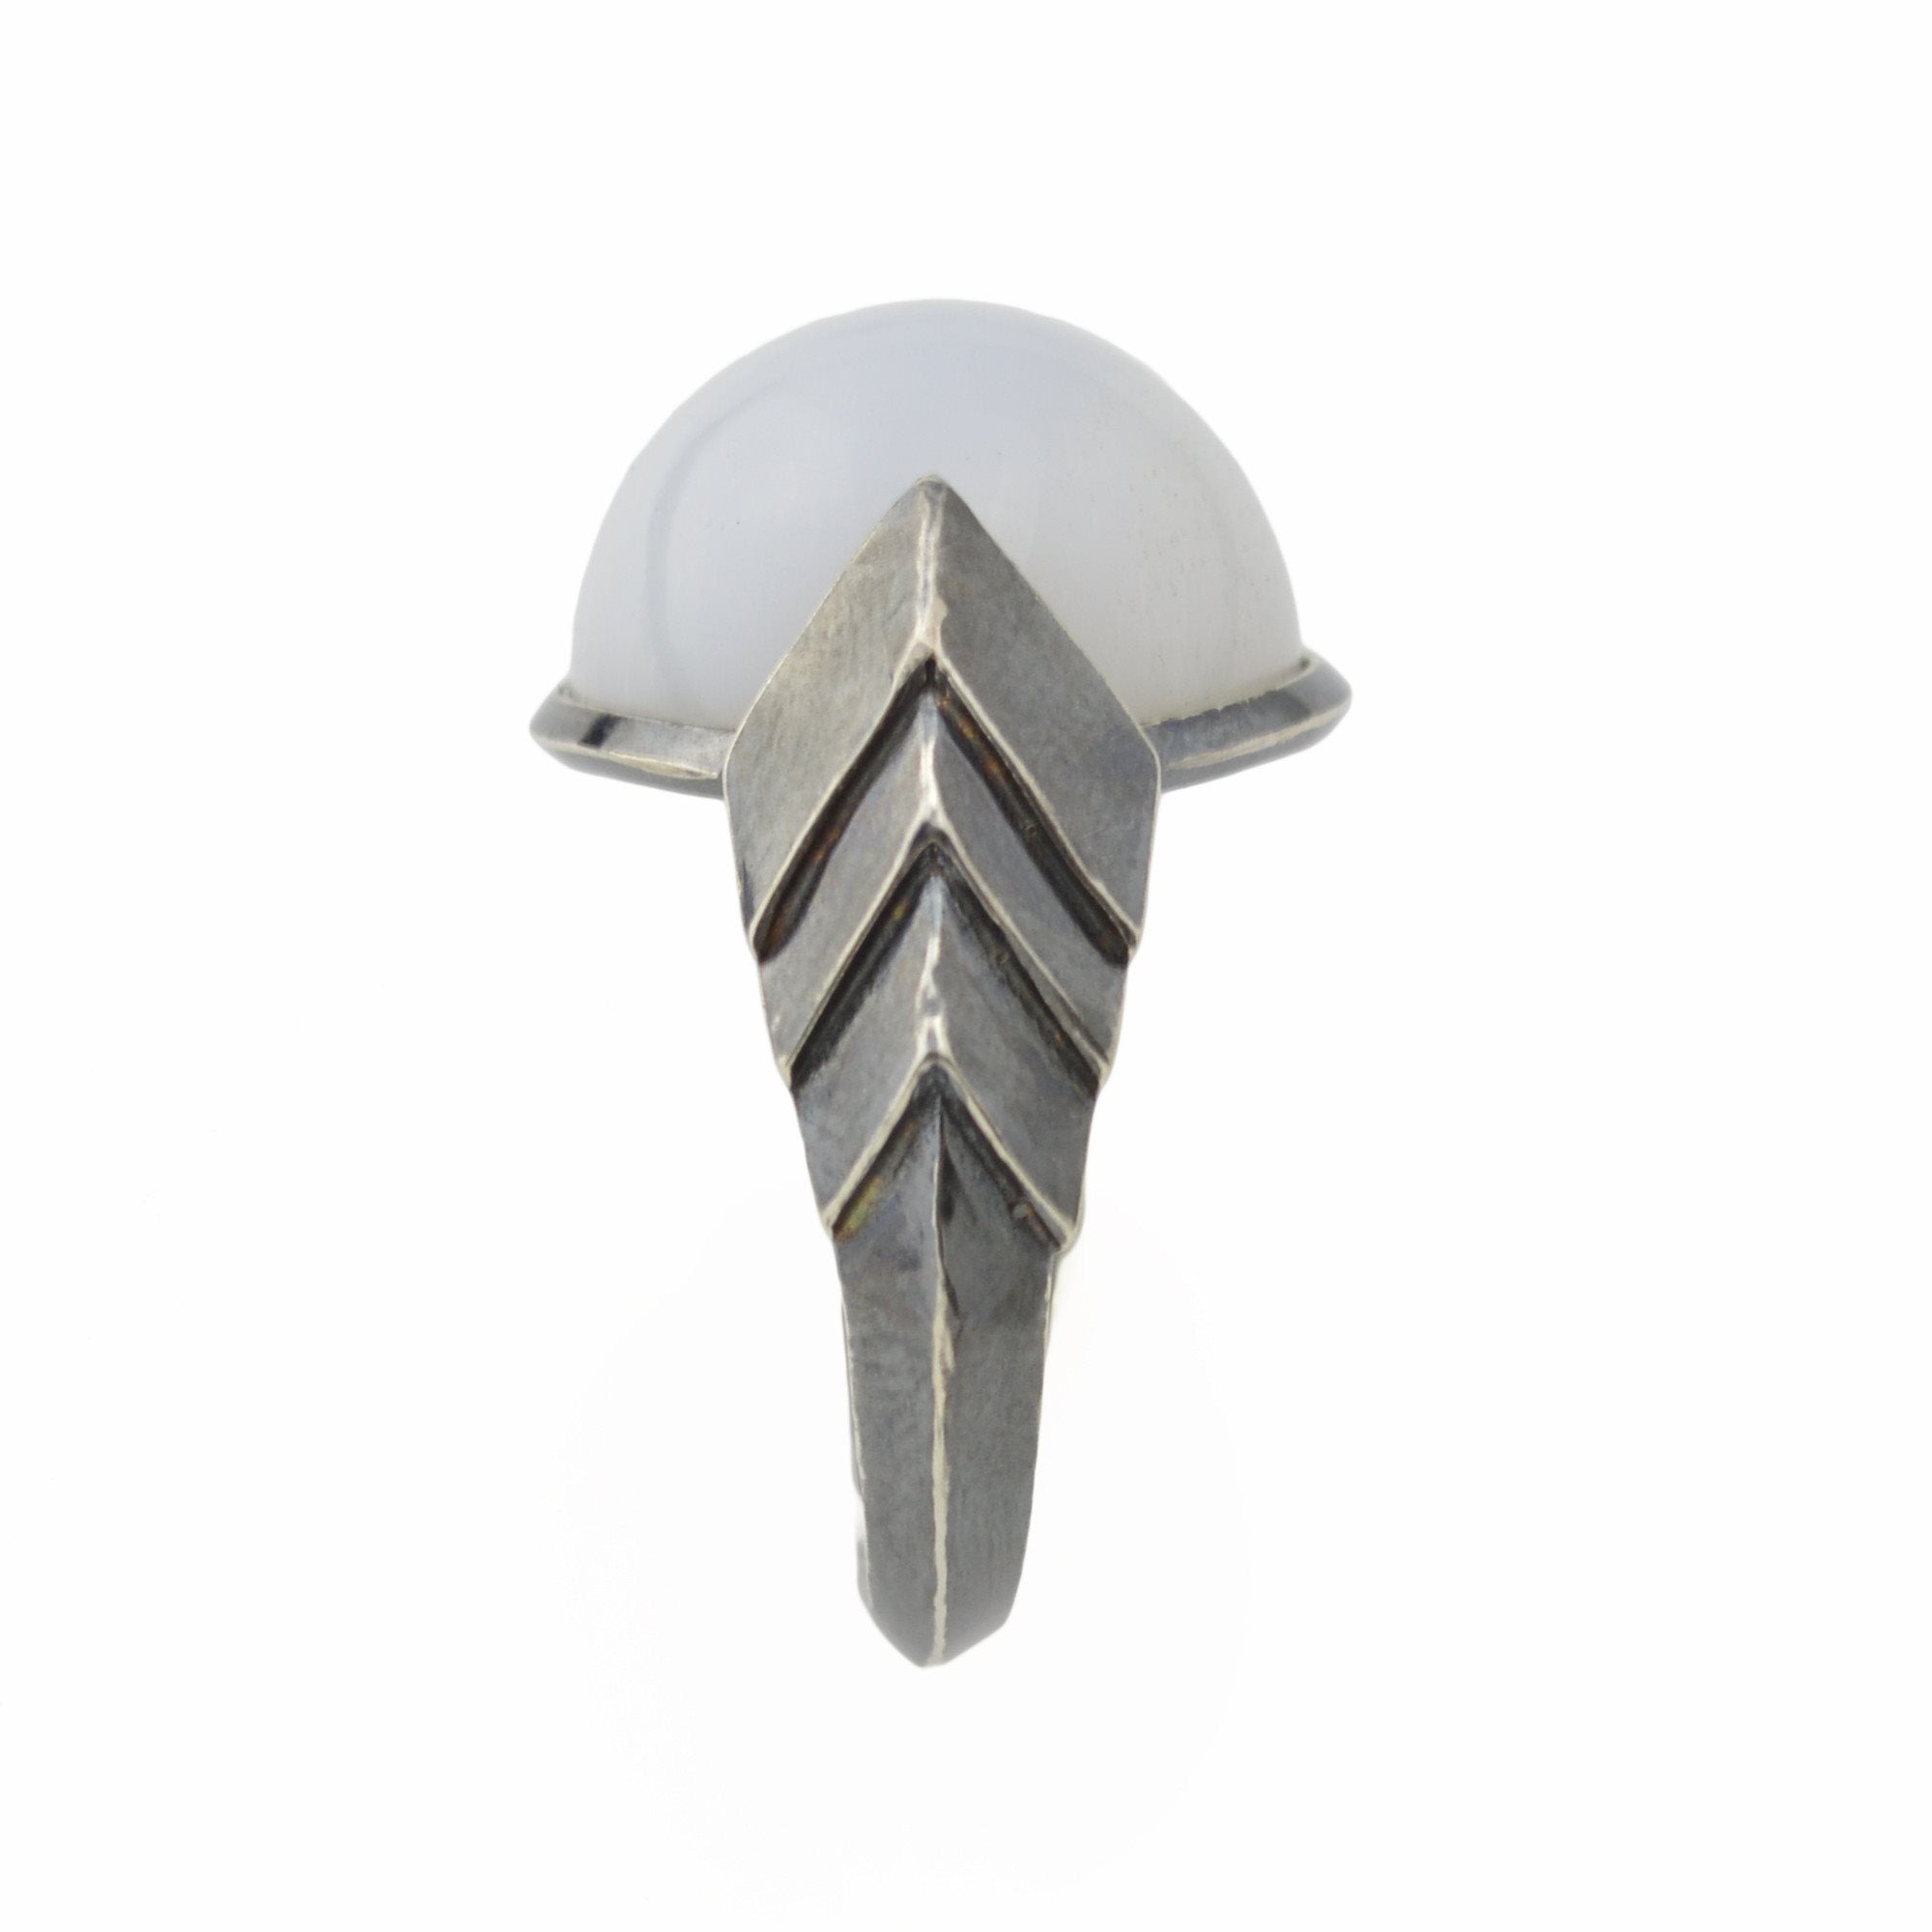 Metropolis Chevron Ring in darkened sterling silver with White Agatized Wood from Australia